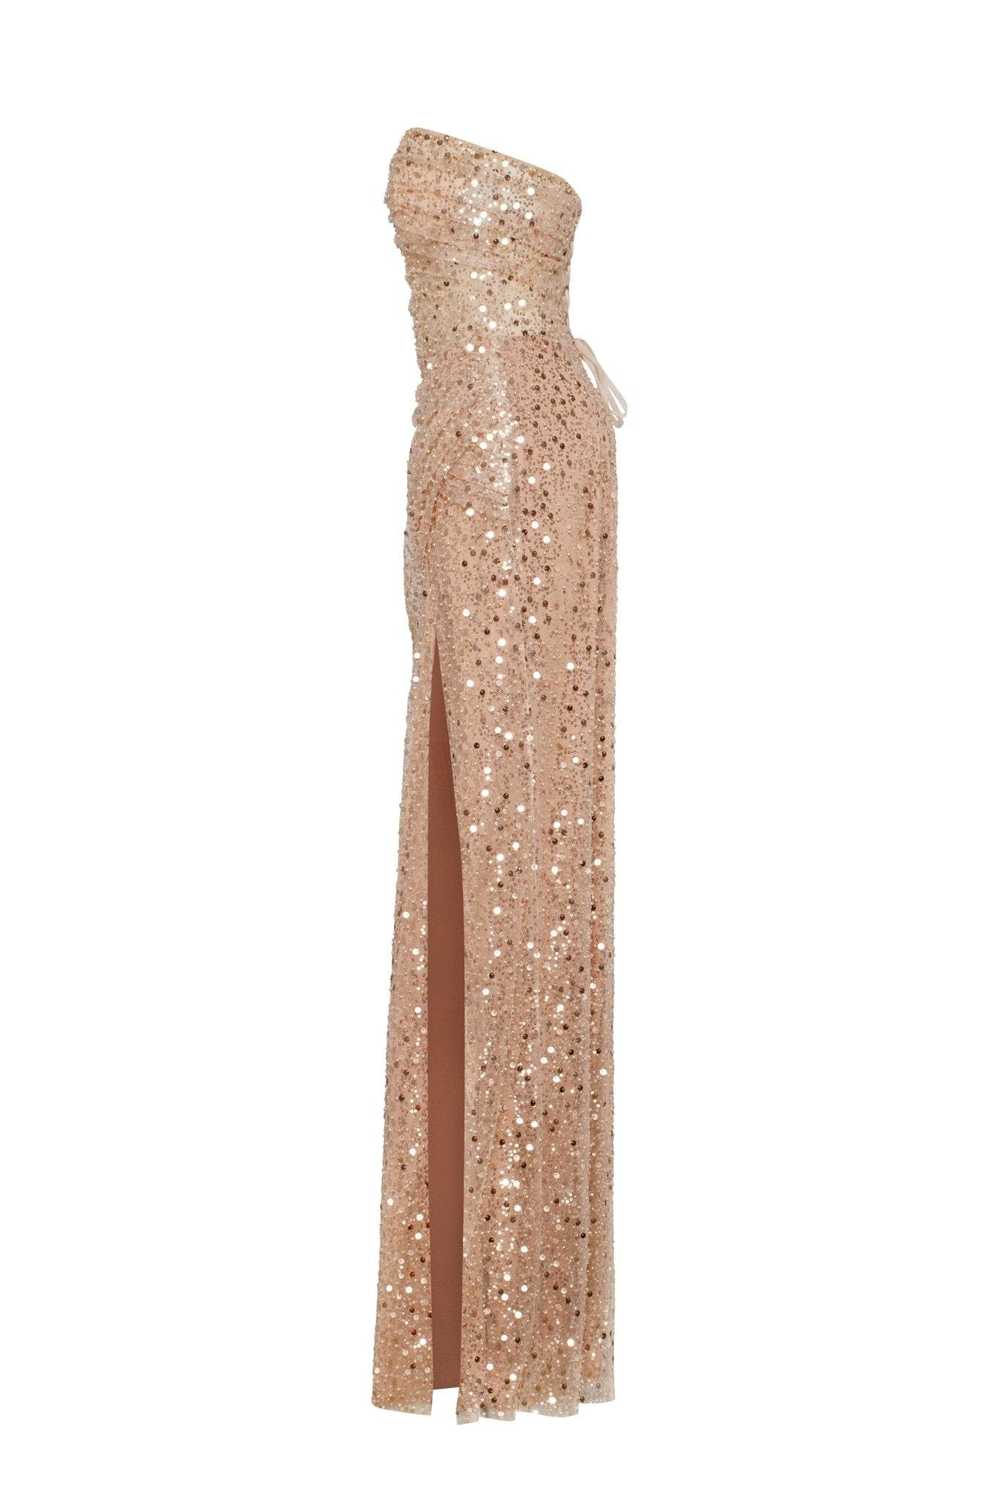 Milla Radiant maxi dress in gold - image 7